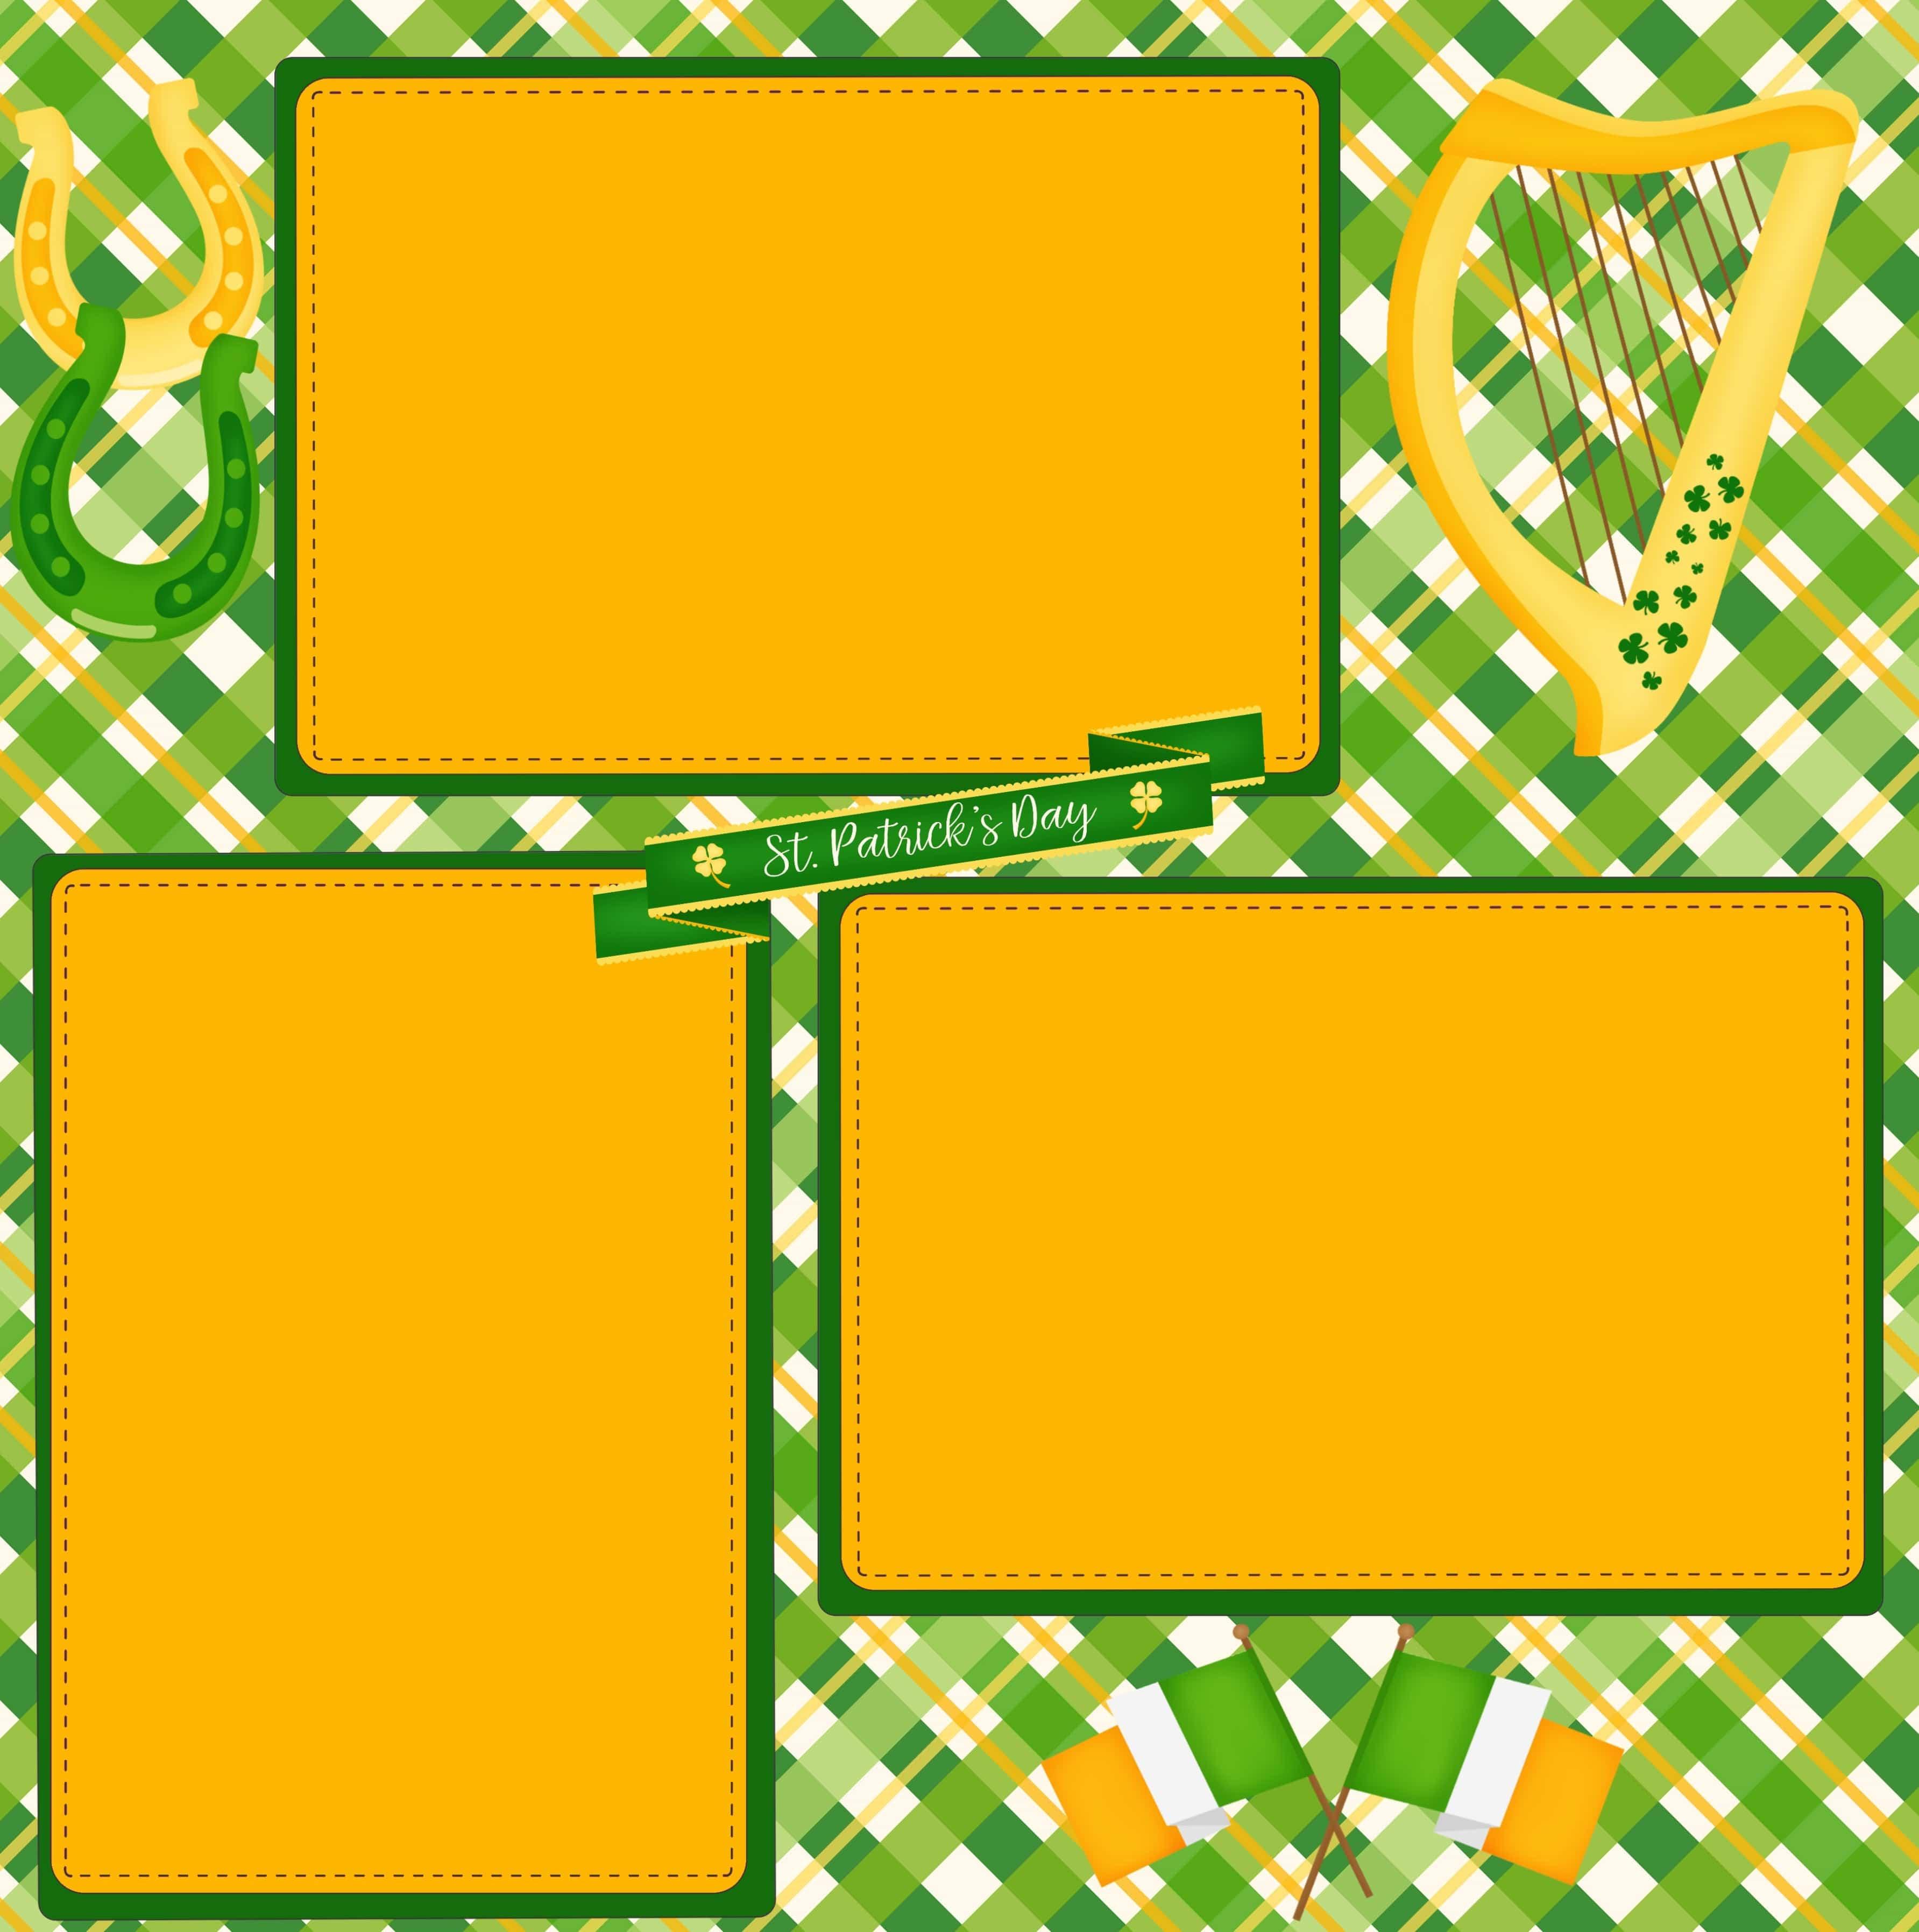 Irish Luck Collection St. Patrick's Day (2) - 12 x 12 Premade, Printed Scrapbook Pages by SSC Designs - Scrapbook Supply Companies